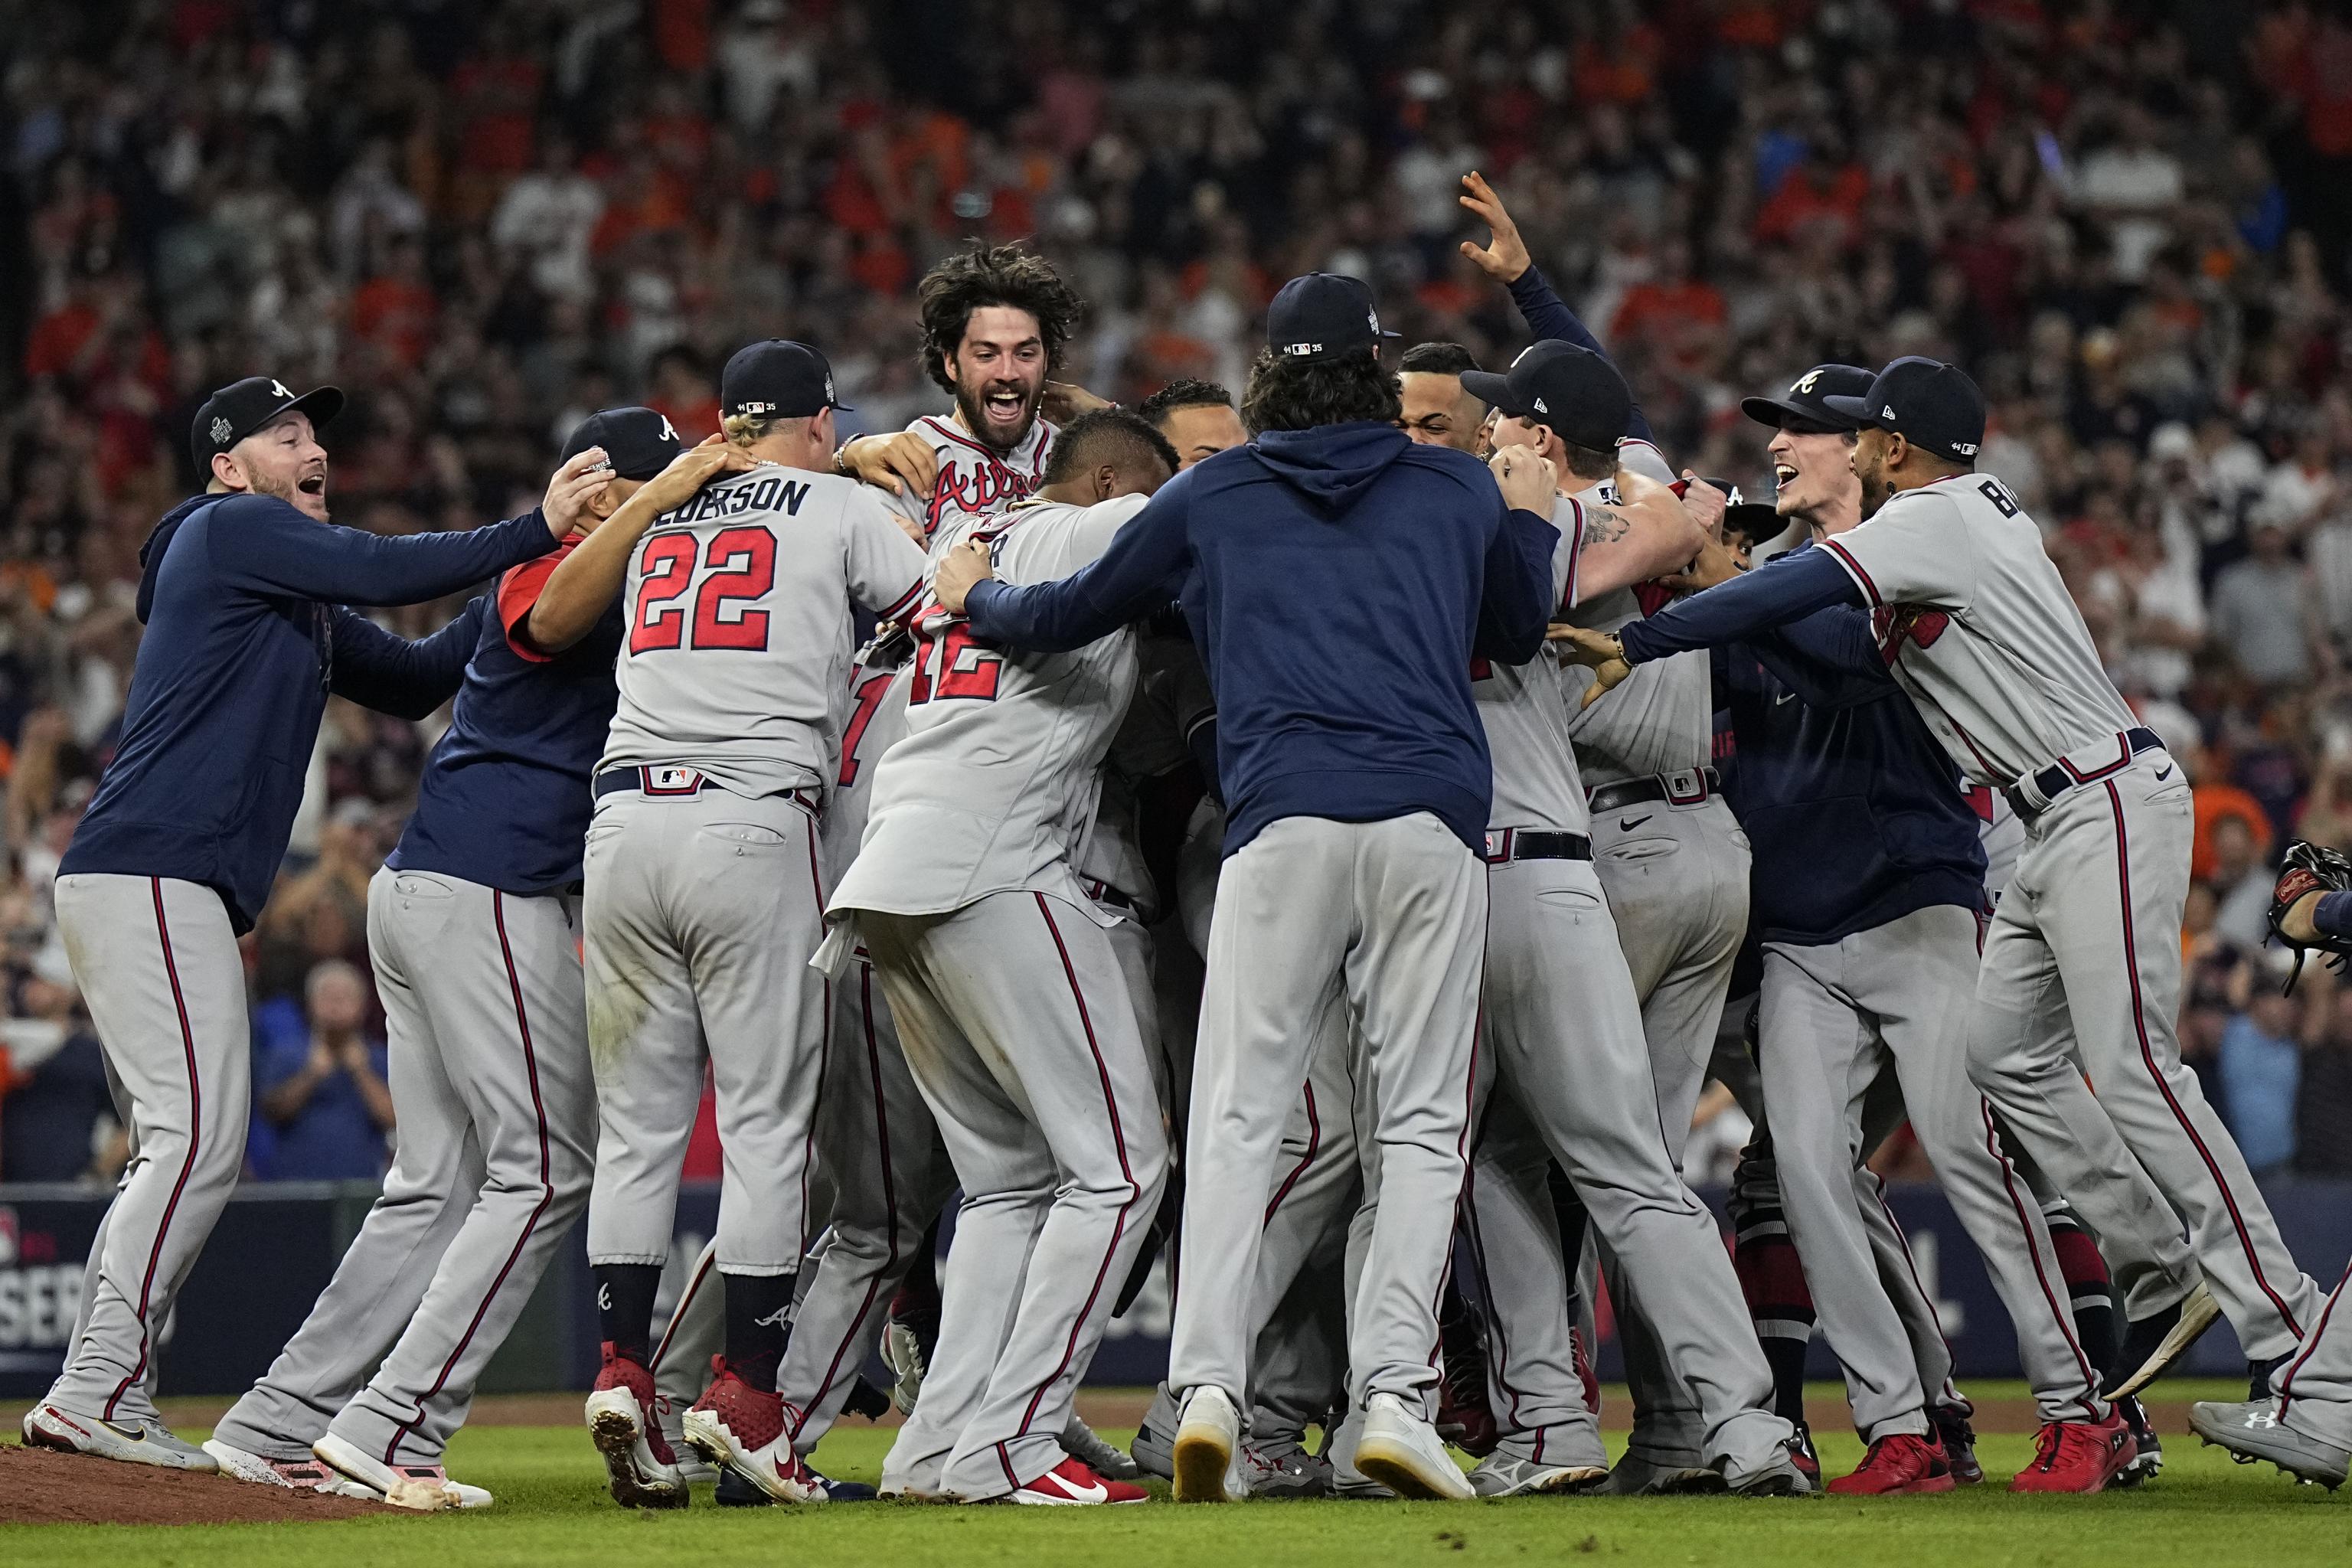 Braves reuniting with key member of 2021 World Series team